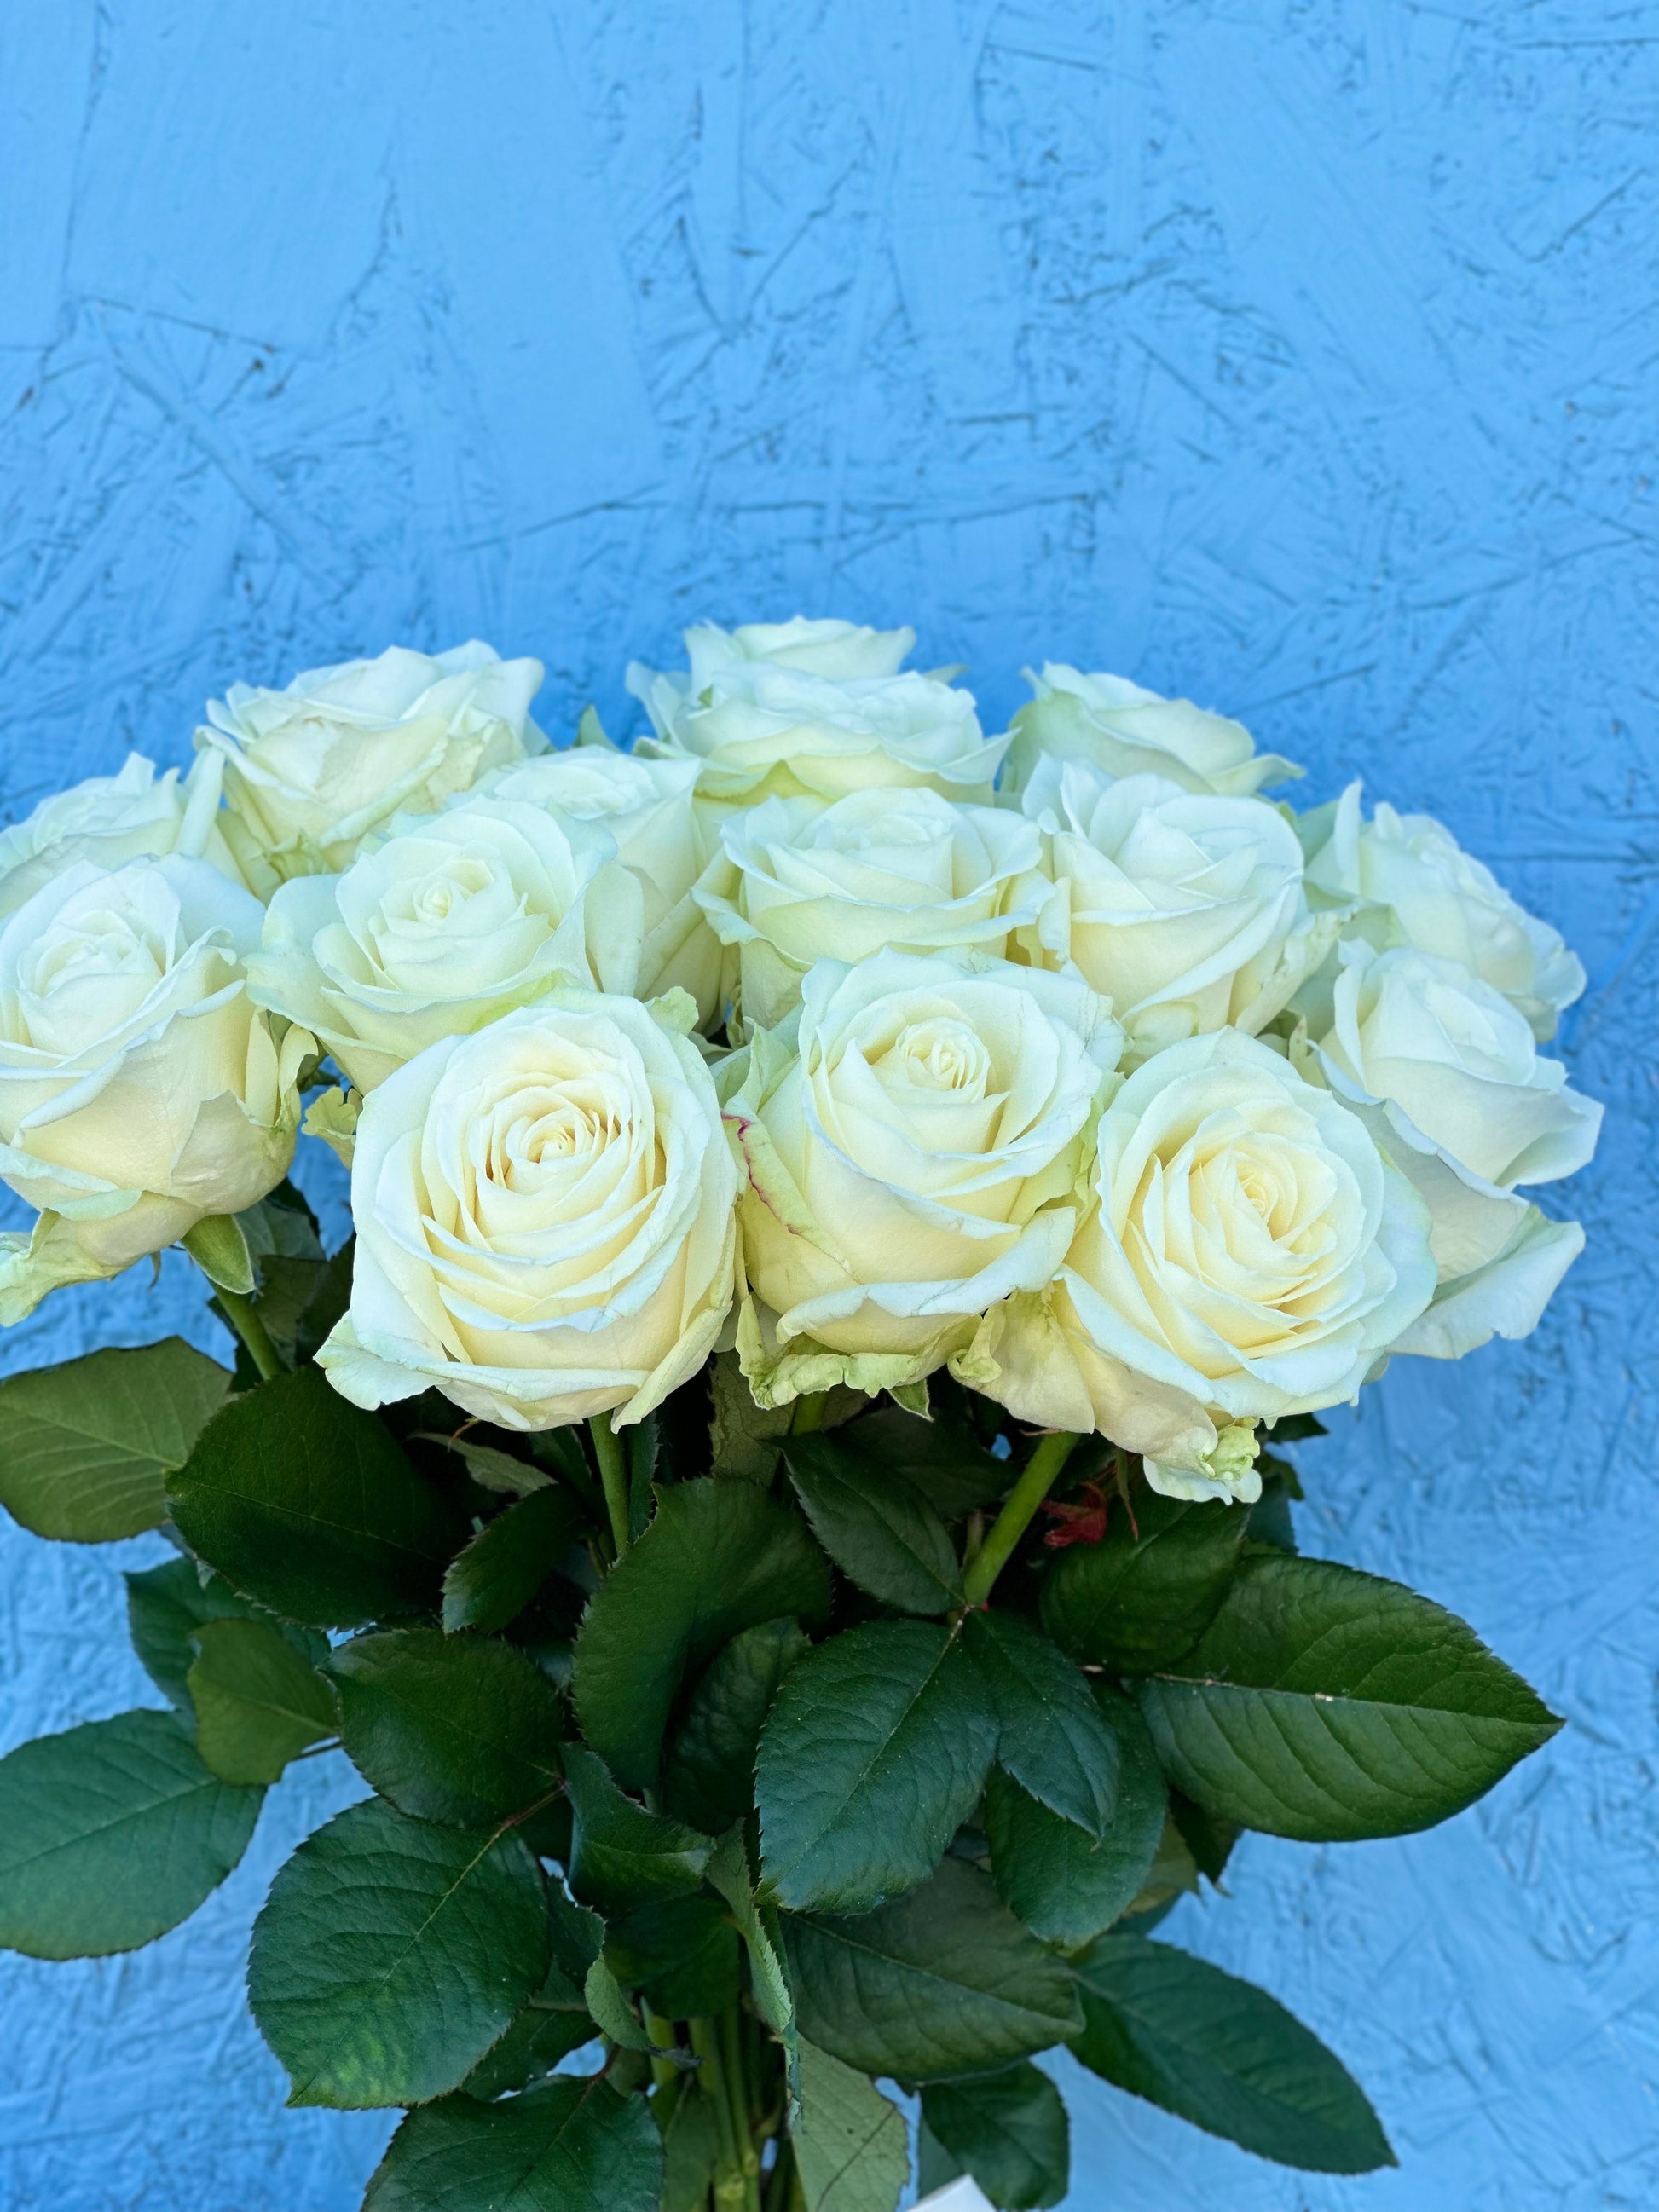 1. A stunning bouquet of white roses held by a person, radiating elegance and purity. 2. Behold the beauty of a person holding a bouquet of pristine white roses, a symbol of love and purity. 3. A person's hand delicately cradles a bouquet of white roses, a timeless and classic gift for any occasion.